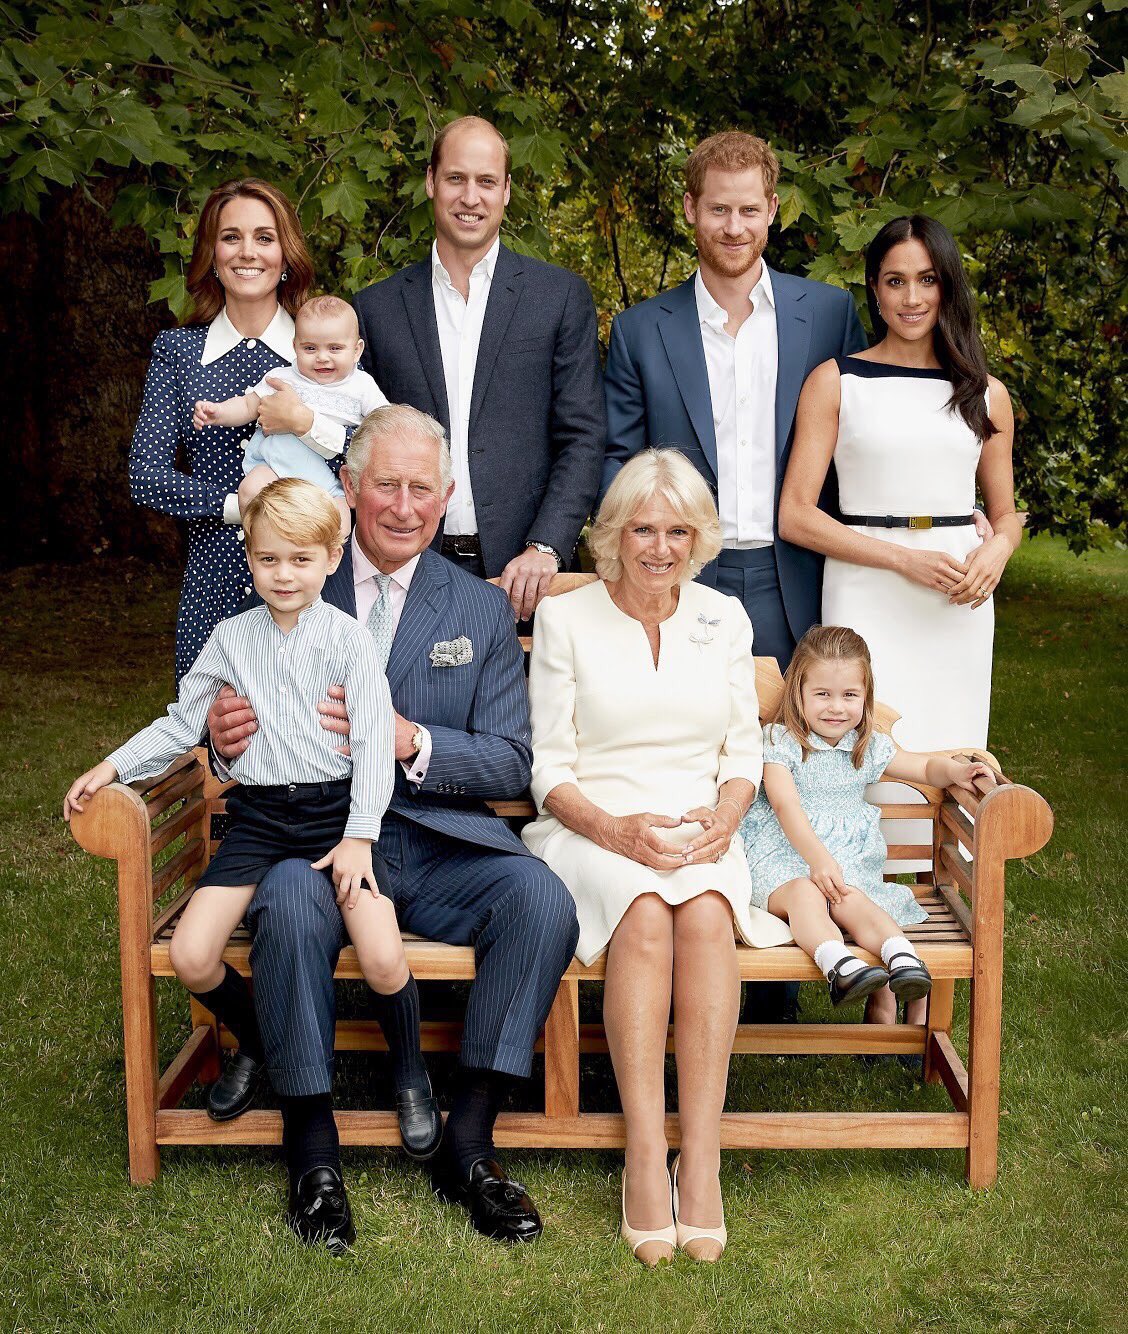 Two fantastic photos from to celebrate Prince Charles birthday - what a happy family! 